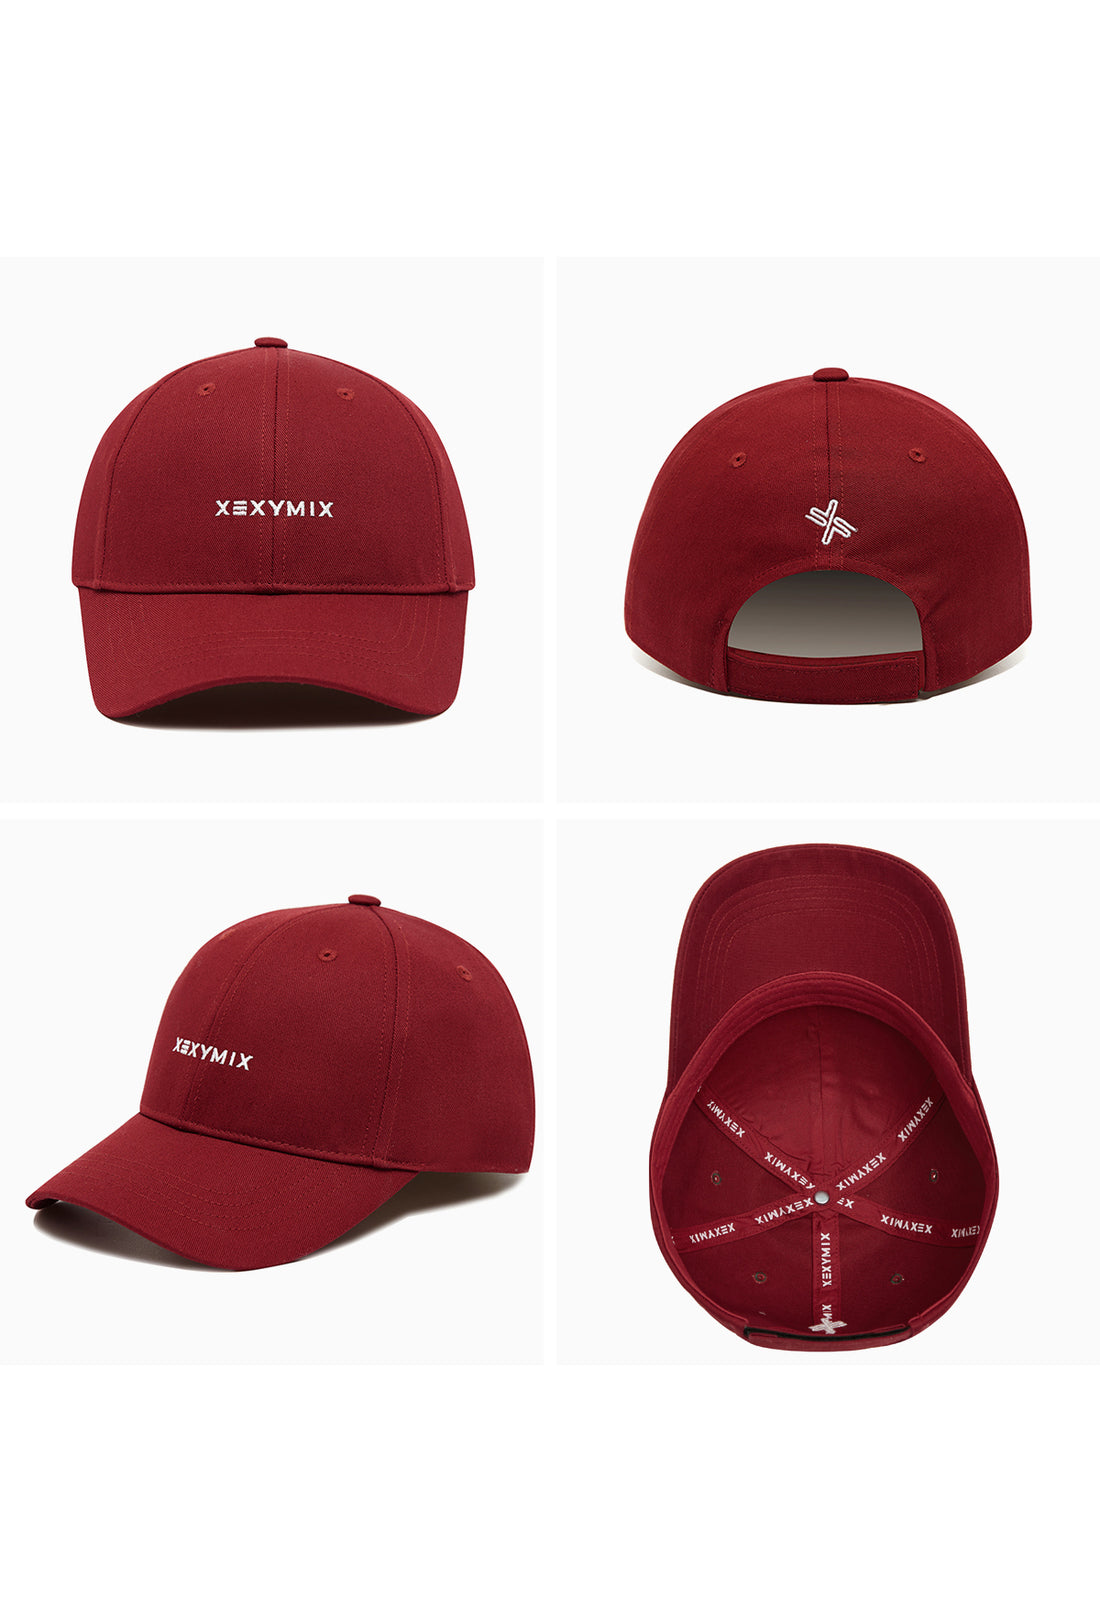 Classic Lettering Ball Cap - Berry Wine